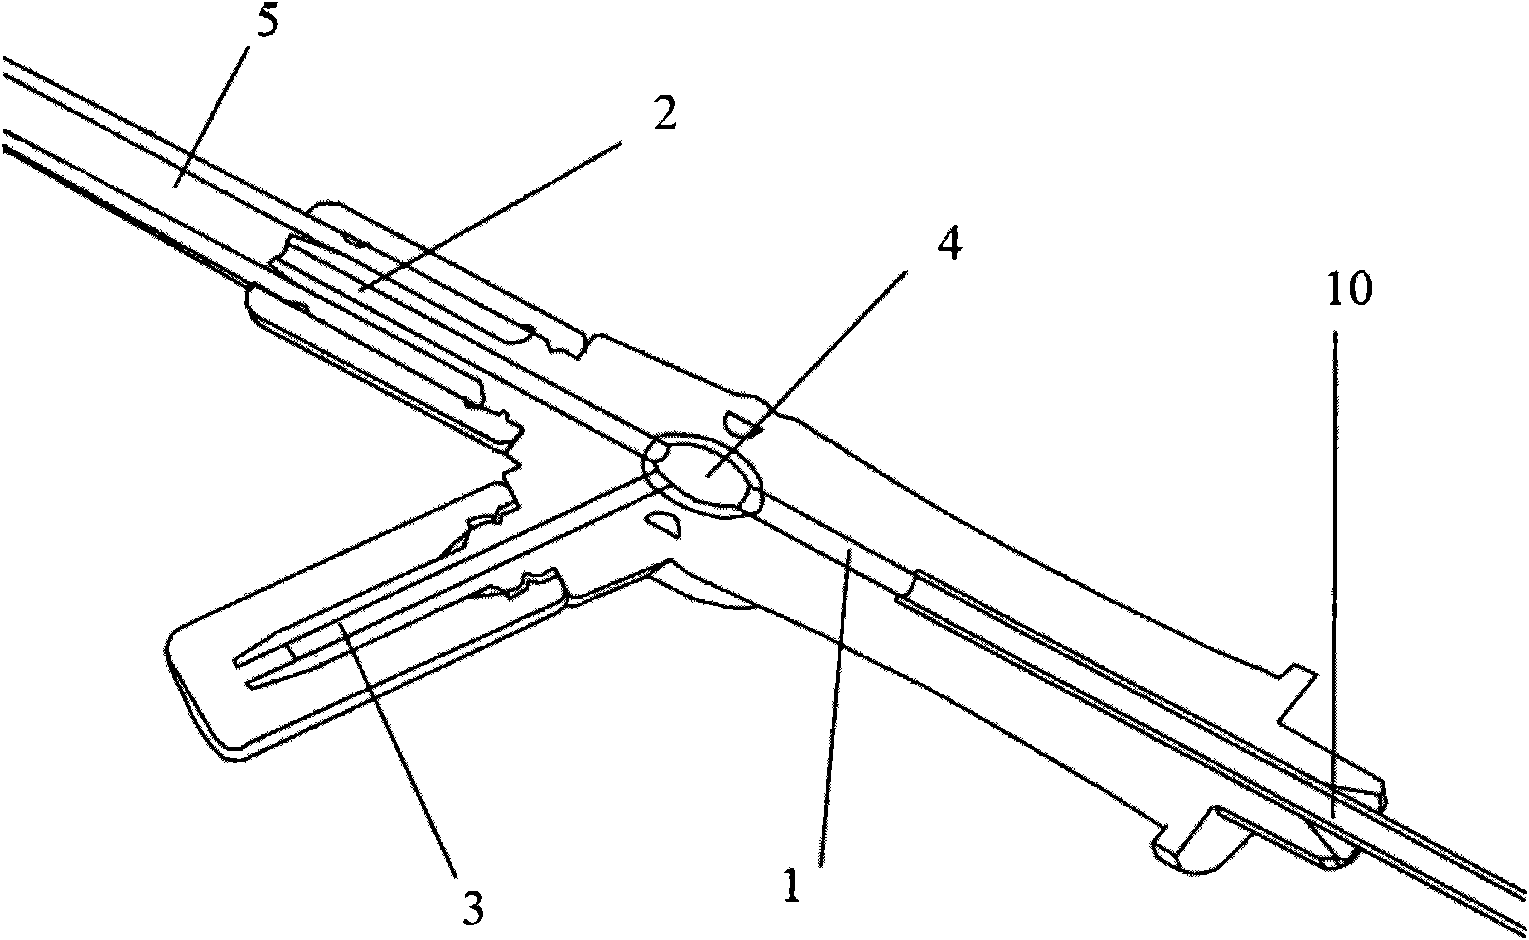 Divided manifold tee joint for germfree ovum aspiration needle